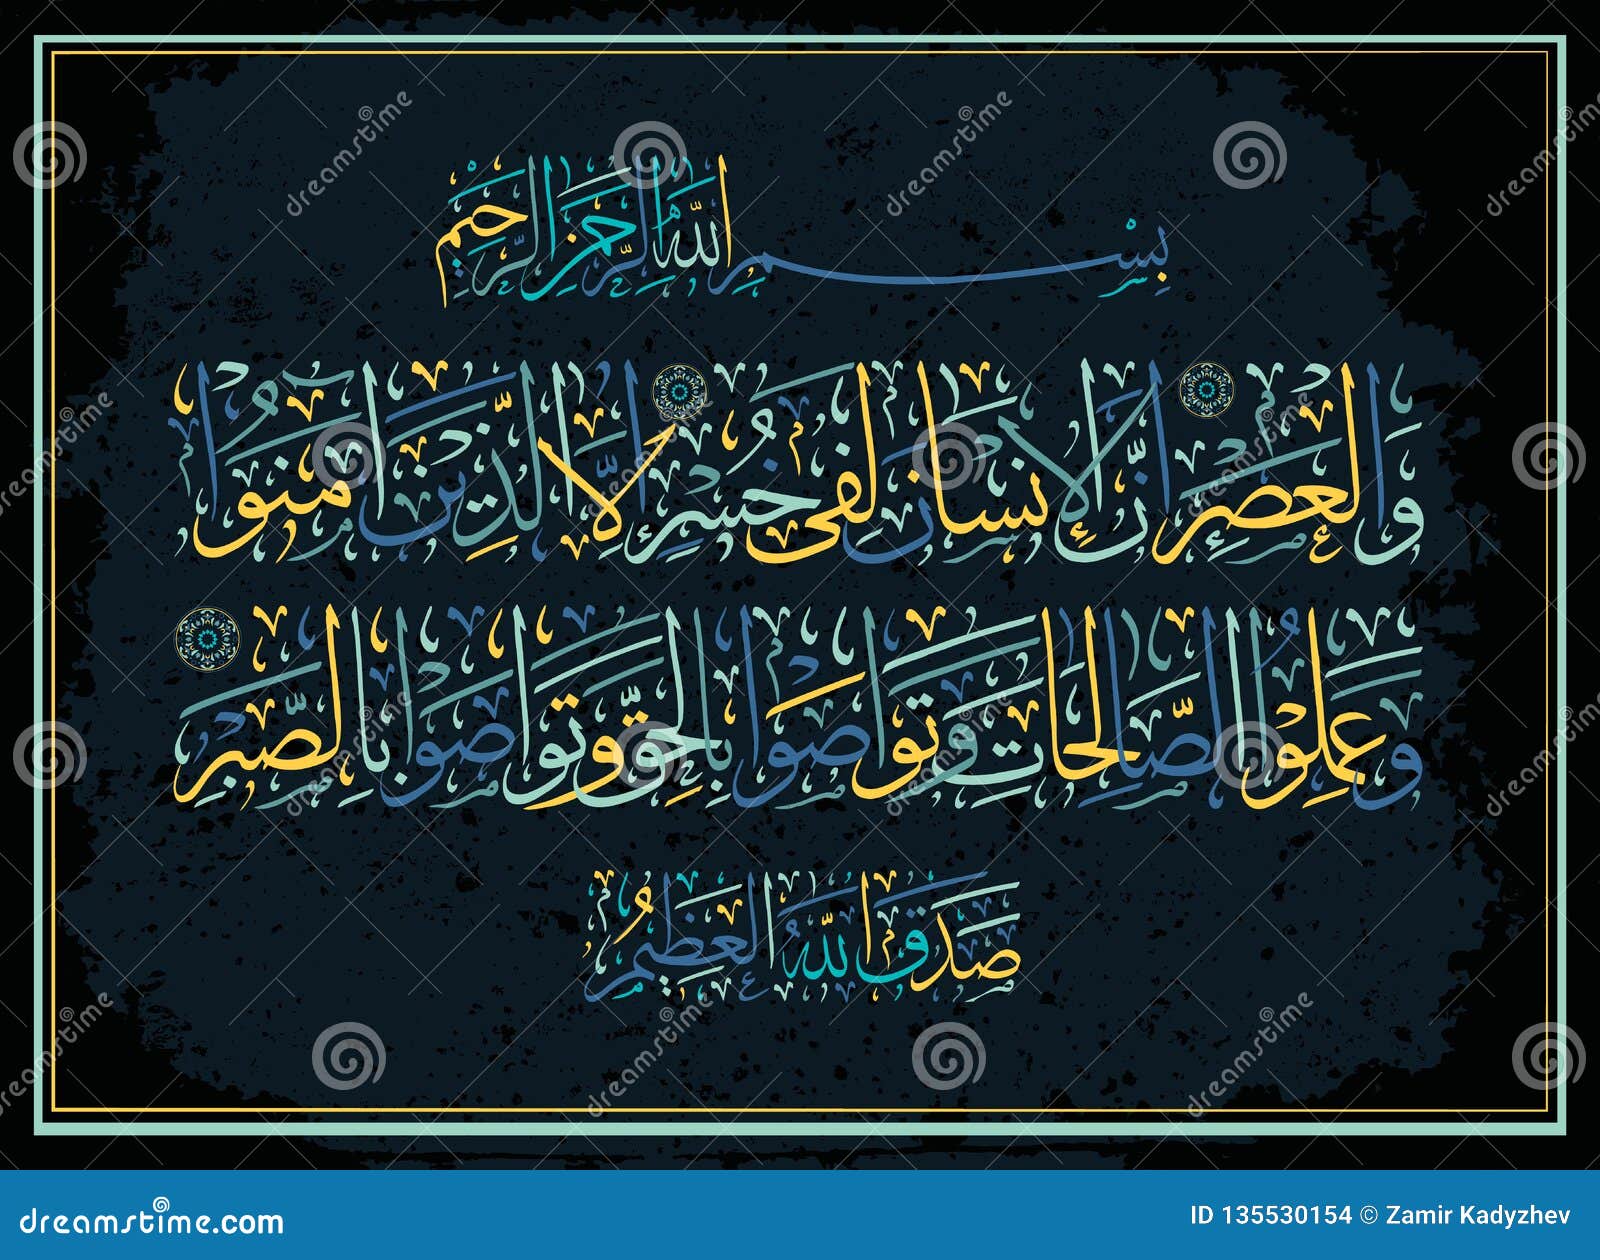 islamic calligraphy of quran and sura asr. time